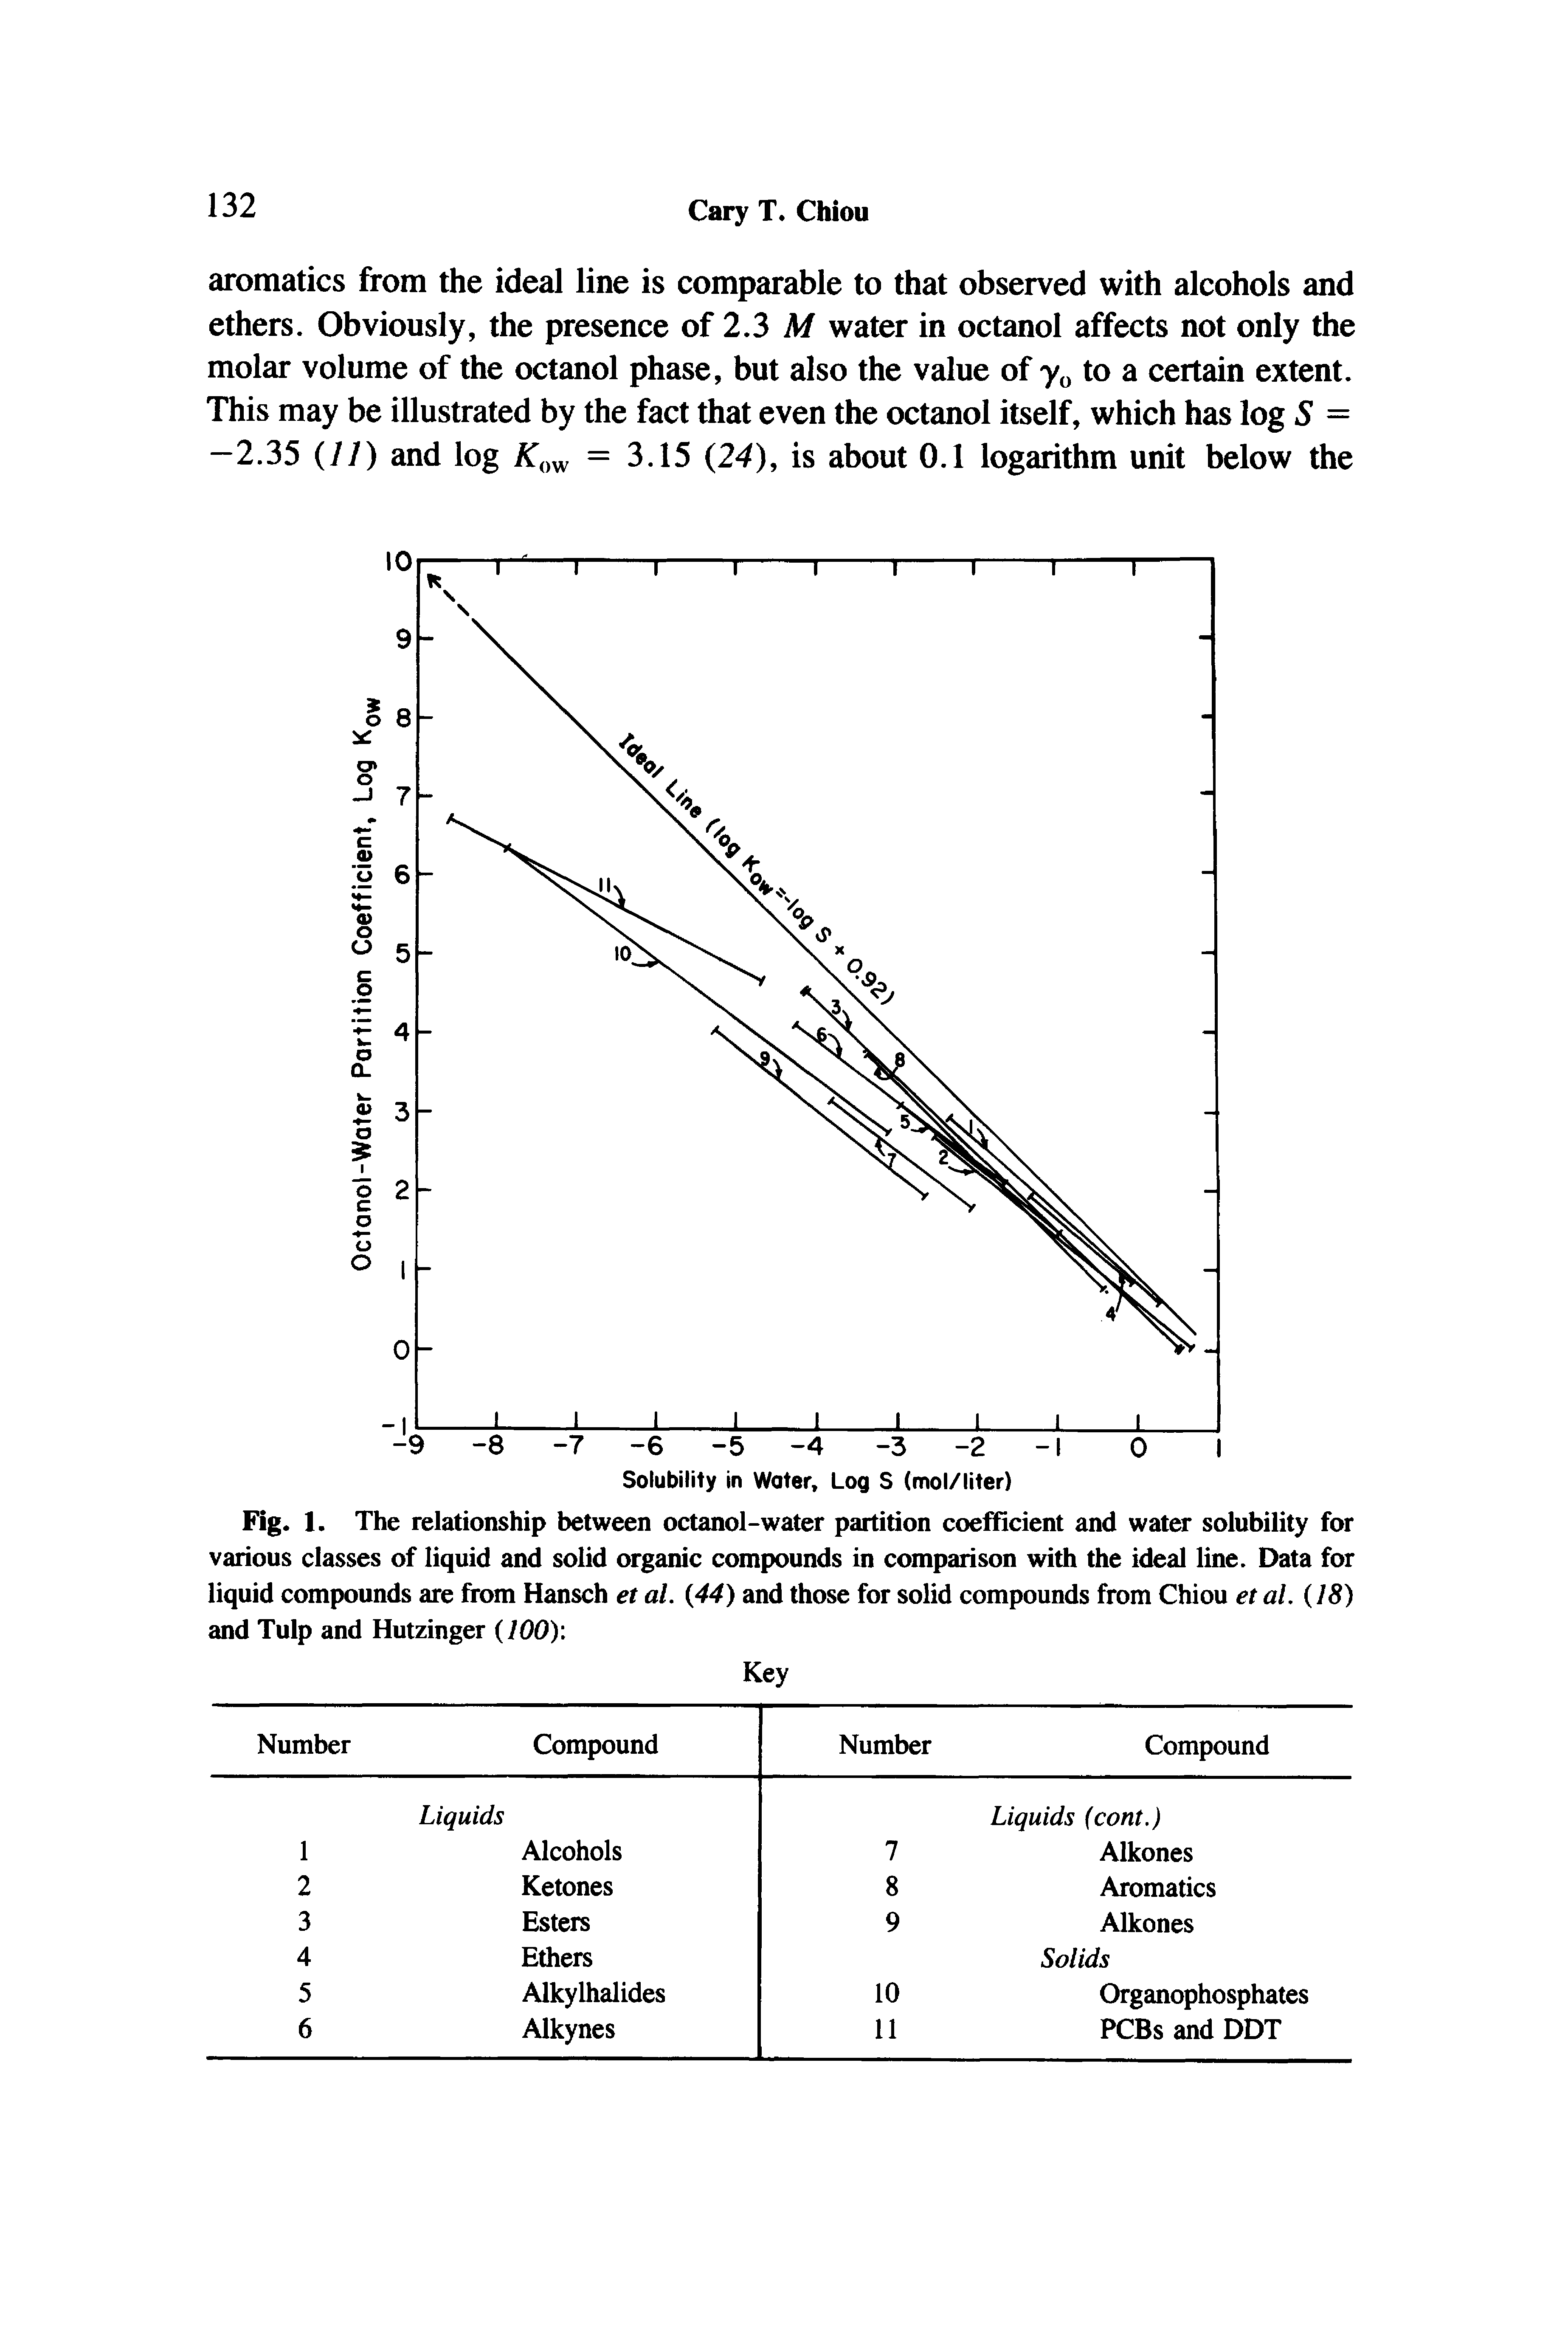 Fig. 1. The relationship between octanol-water partition coefficient and water solubility for various classes of liquid and solid organic compounds in comparison with the ideal line. Data for liquid compounds are from Hansch et al. 44) and those for solid compounds from Chiou et al. 18) and Tulp and Hutzinger lOOy.